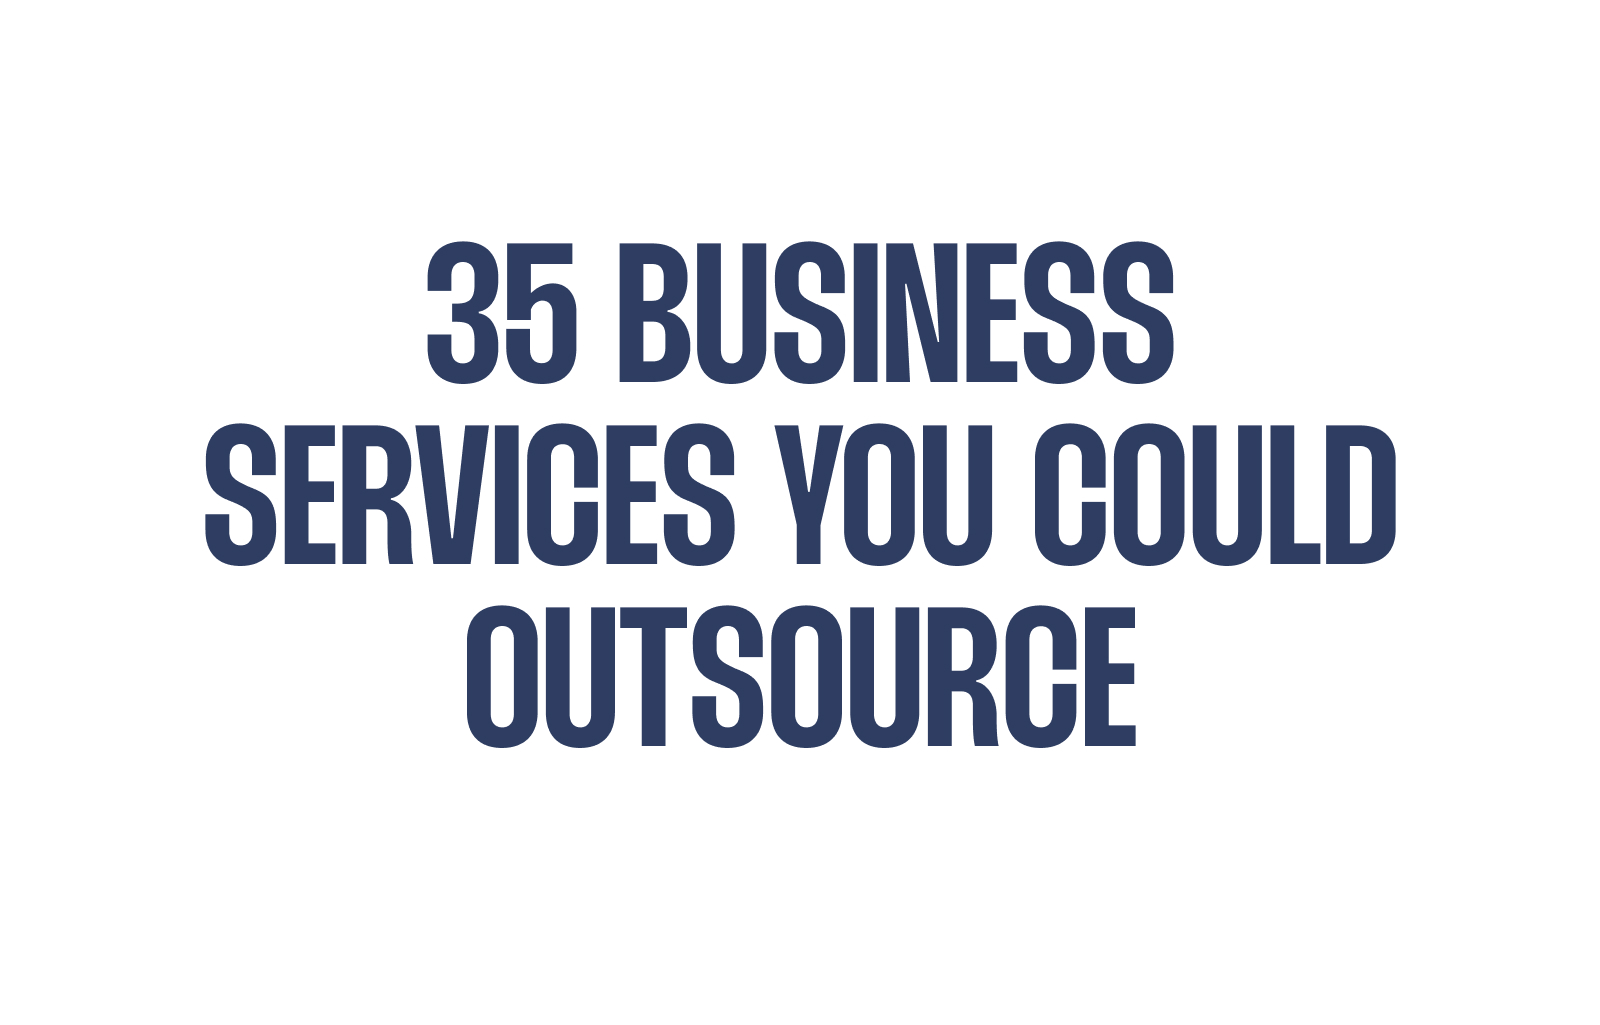 35 Business Services You Could Outsource